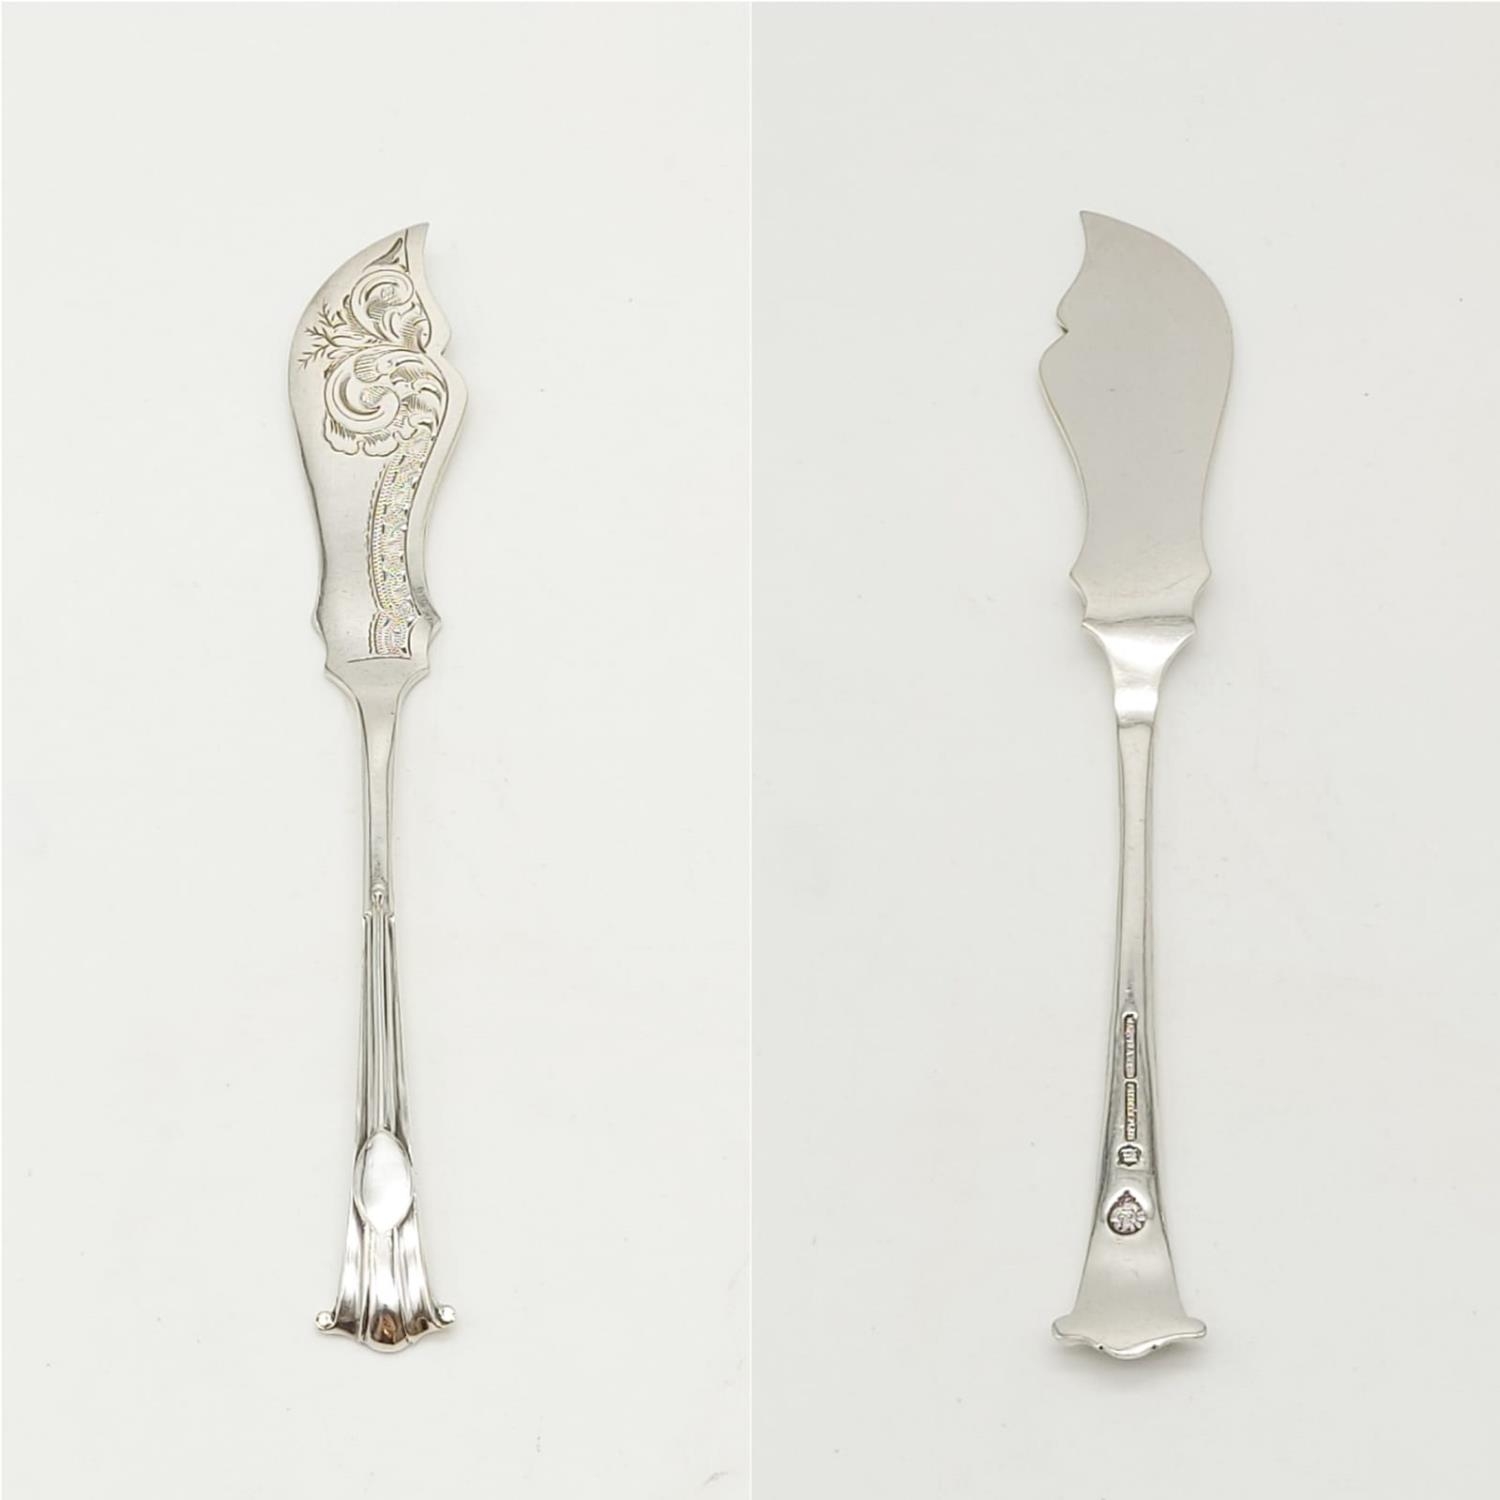 A Vintage Mappin and Webb Fish Entrée Cutlery Set. Prince's Silver plate with engraved decoration. - Image 10 of 16